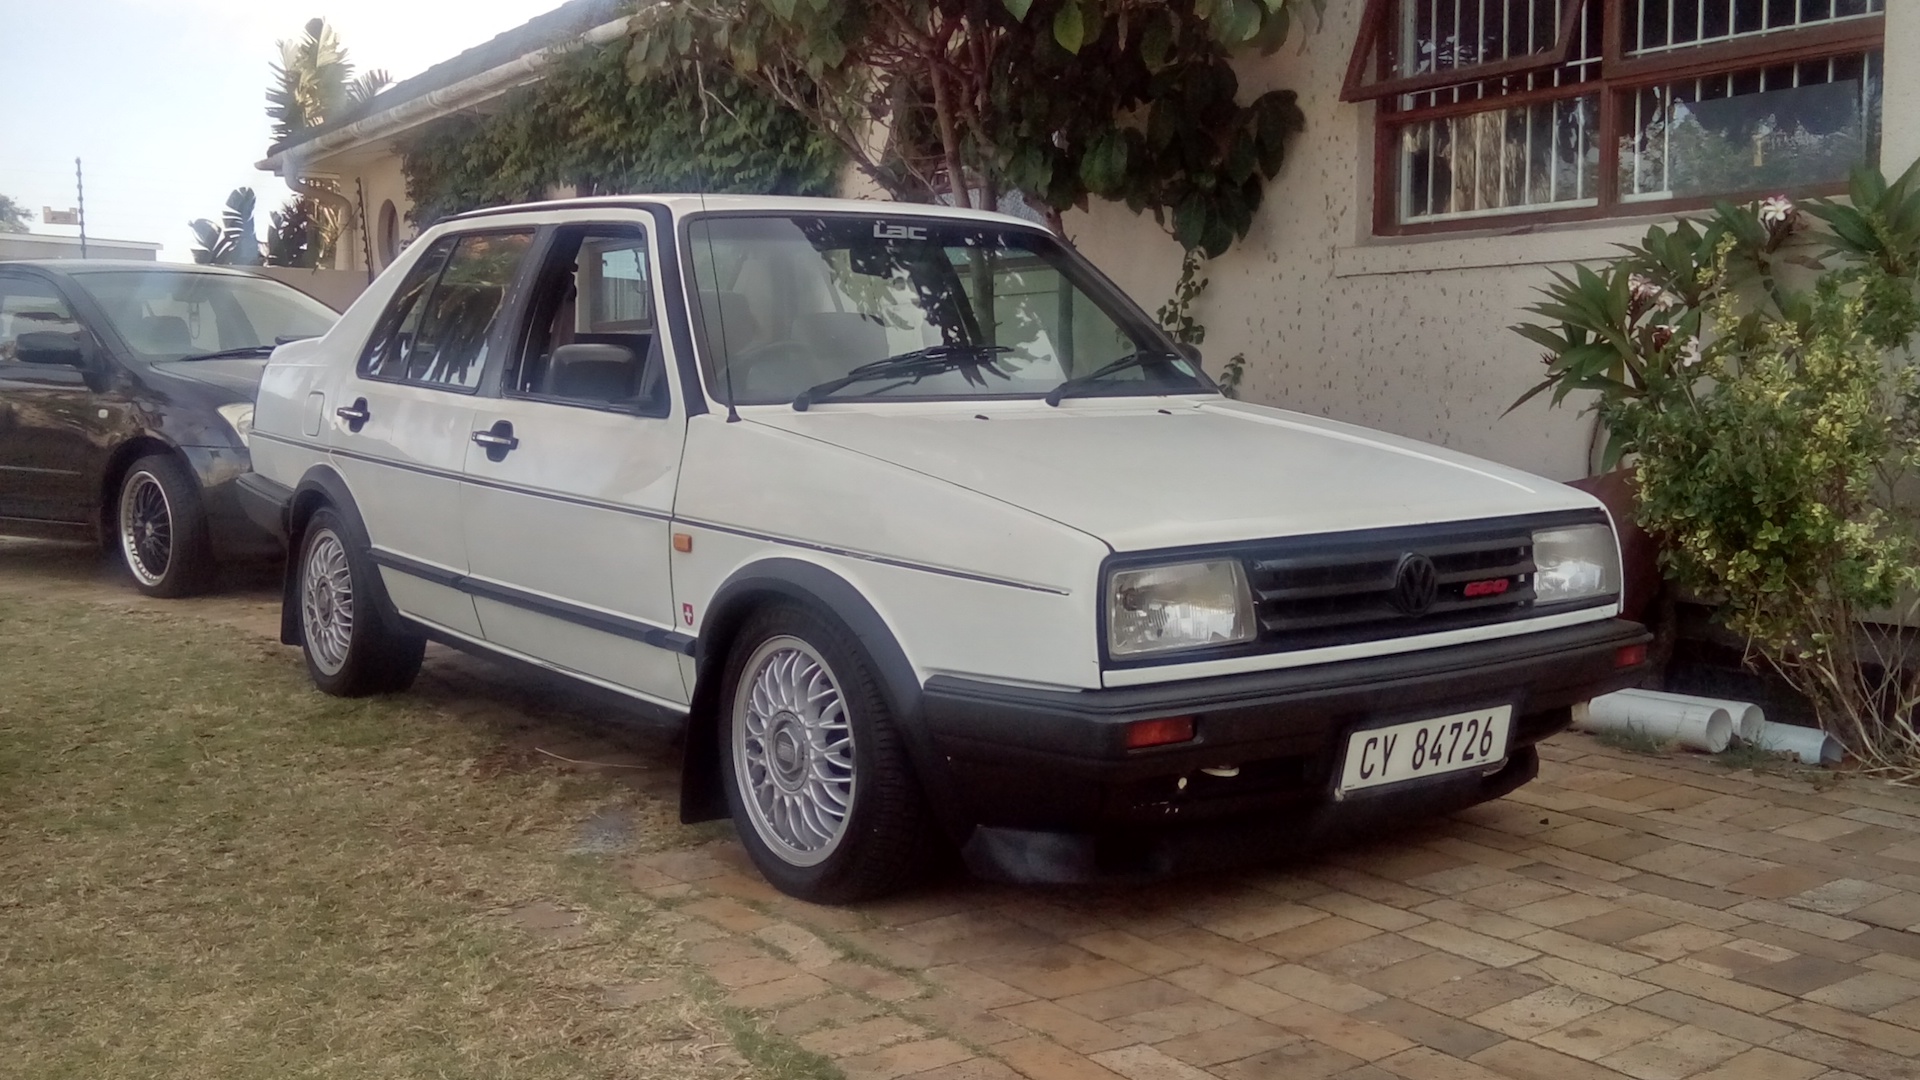 Take to the Road Enthusiasts Garage - Classic VW Passion South African style